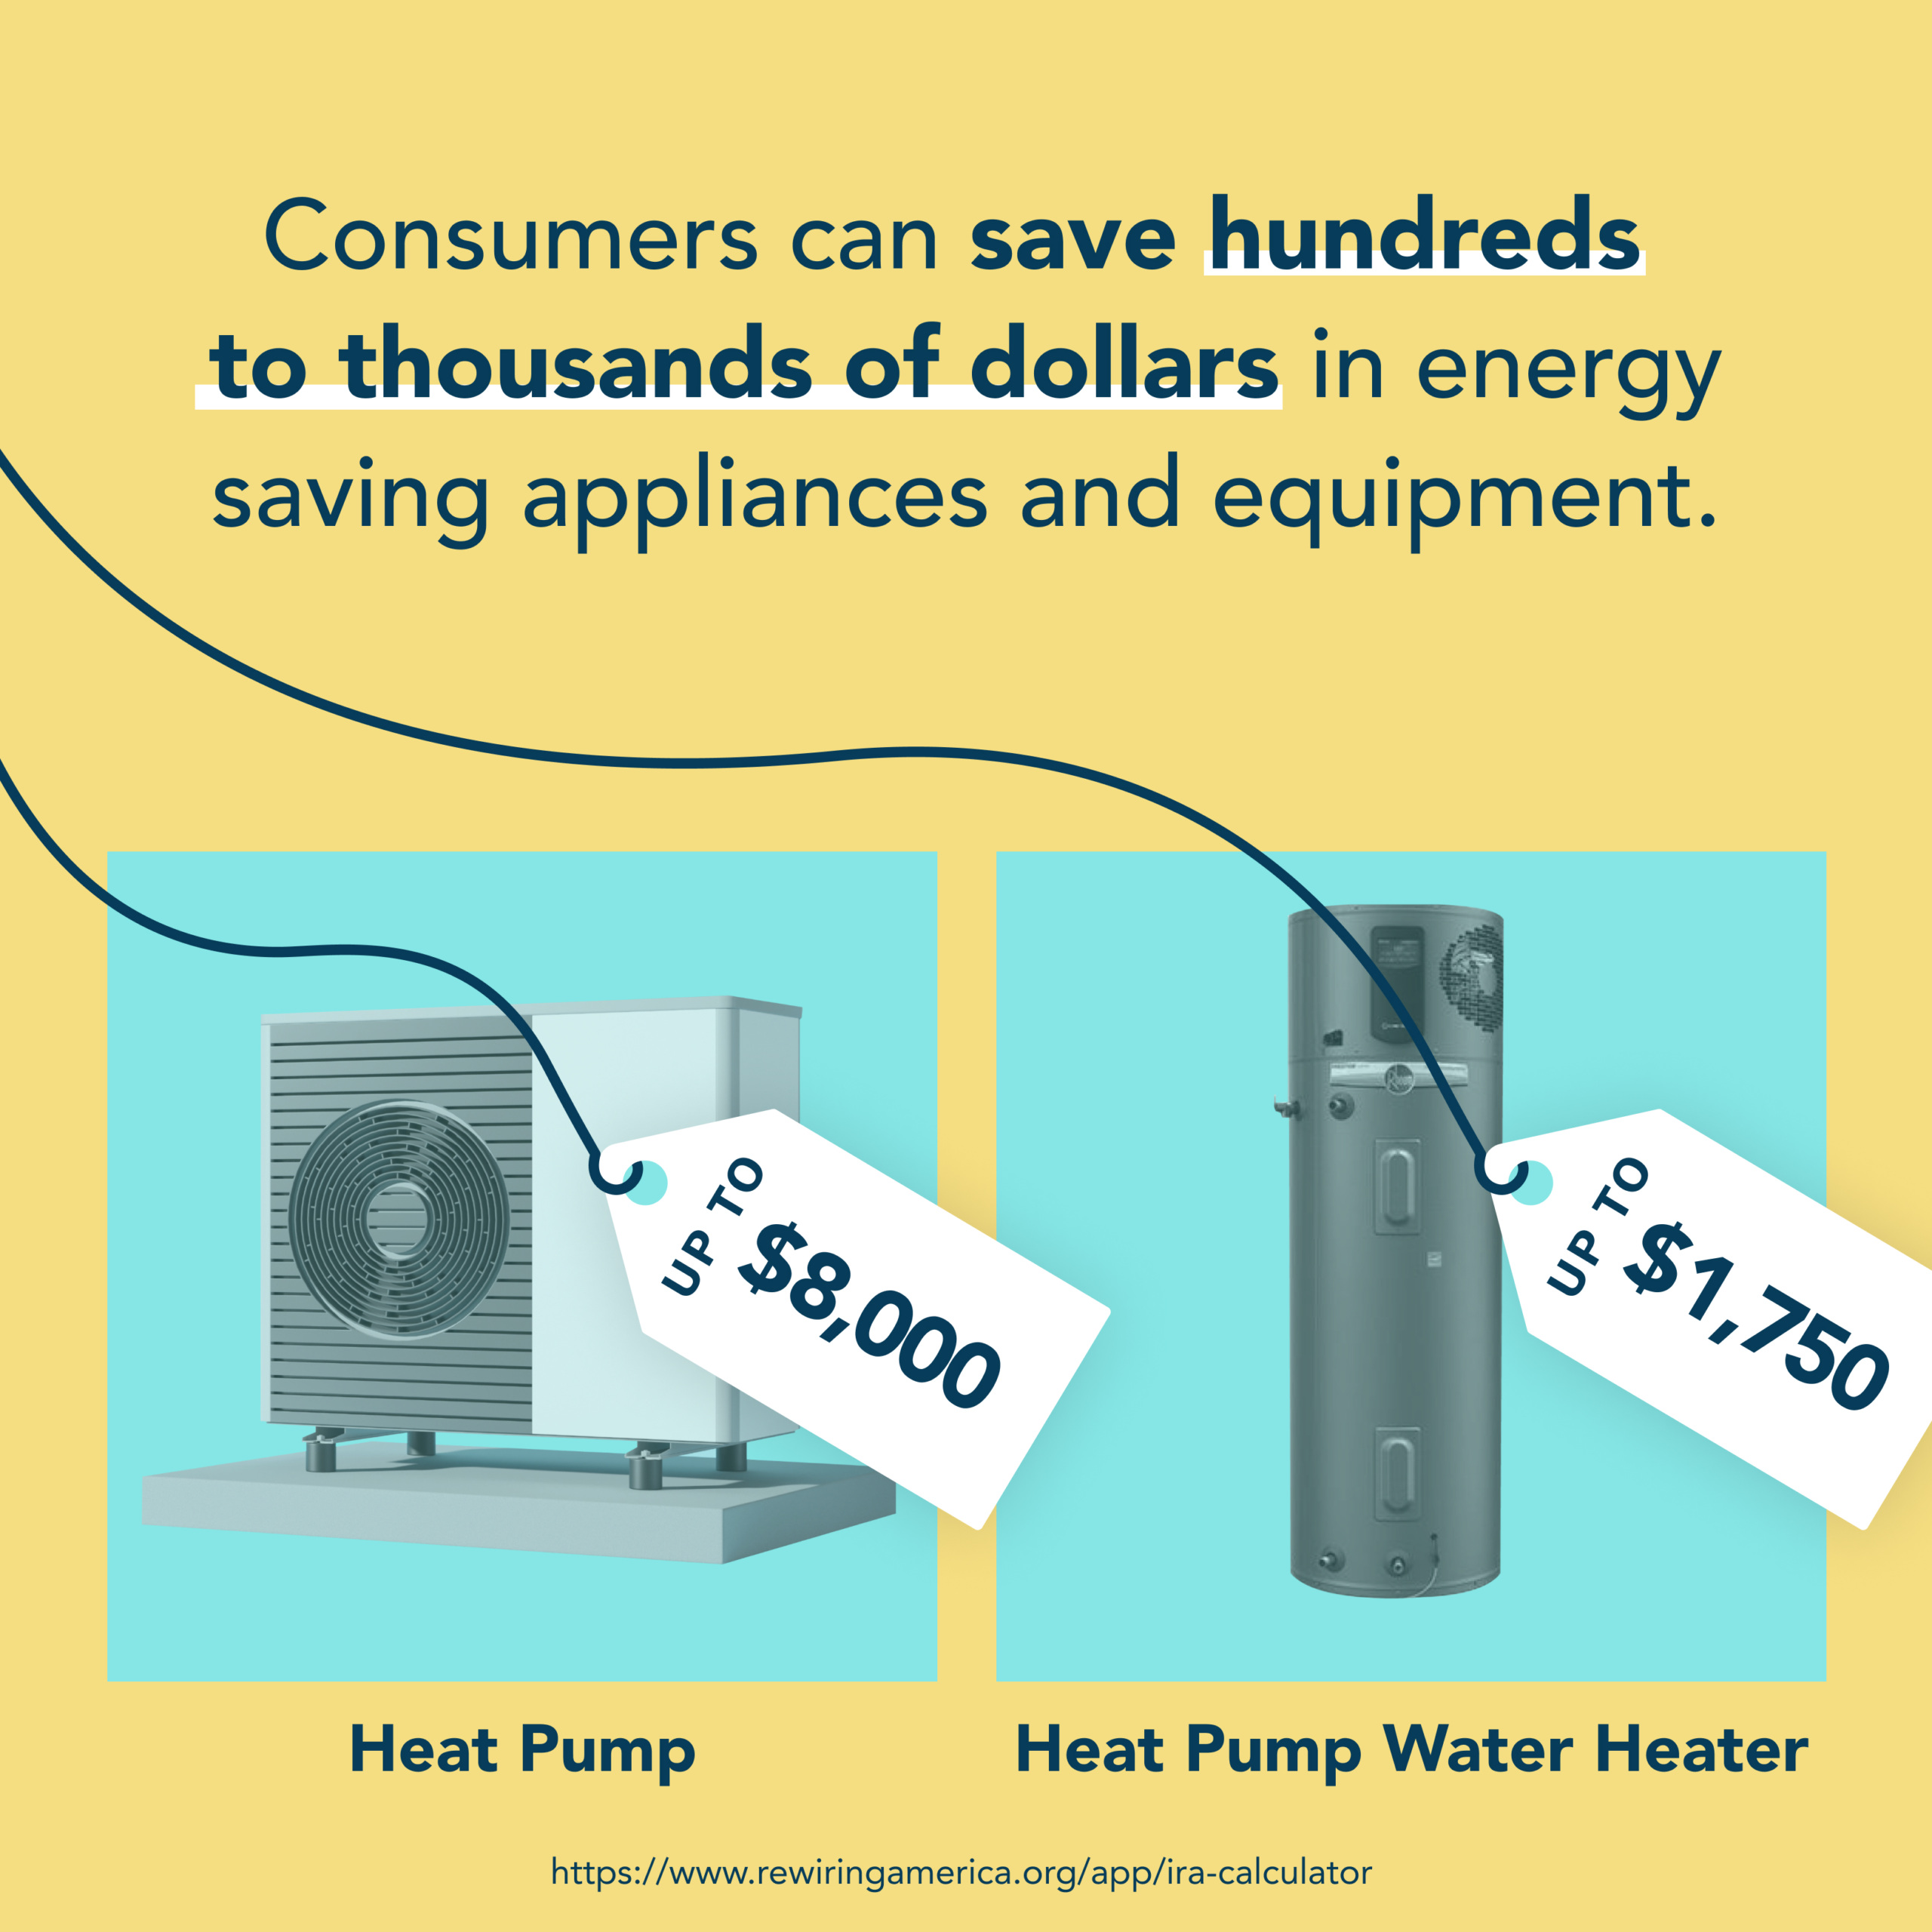 A yellow and blue graphic showing affordable clean energy benefits. At the top there is text that reads &quot;Consumers can save hundreds to thousands of dollars in energy saving appliances and equipment&quot;. Below the text, there are images of a heat pump with a tag that reads &quot;up to $8,000&quot; and a Heat Pump Water Heater with a tag that reads &quot;Up to $1,750&quot;.